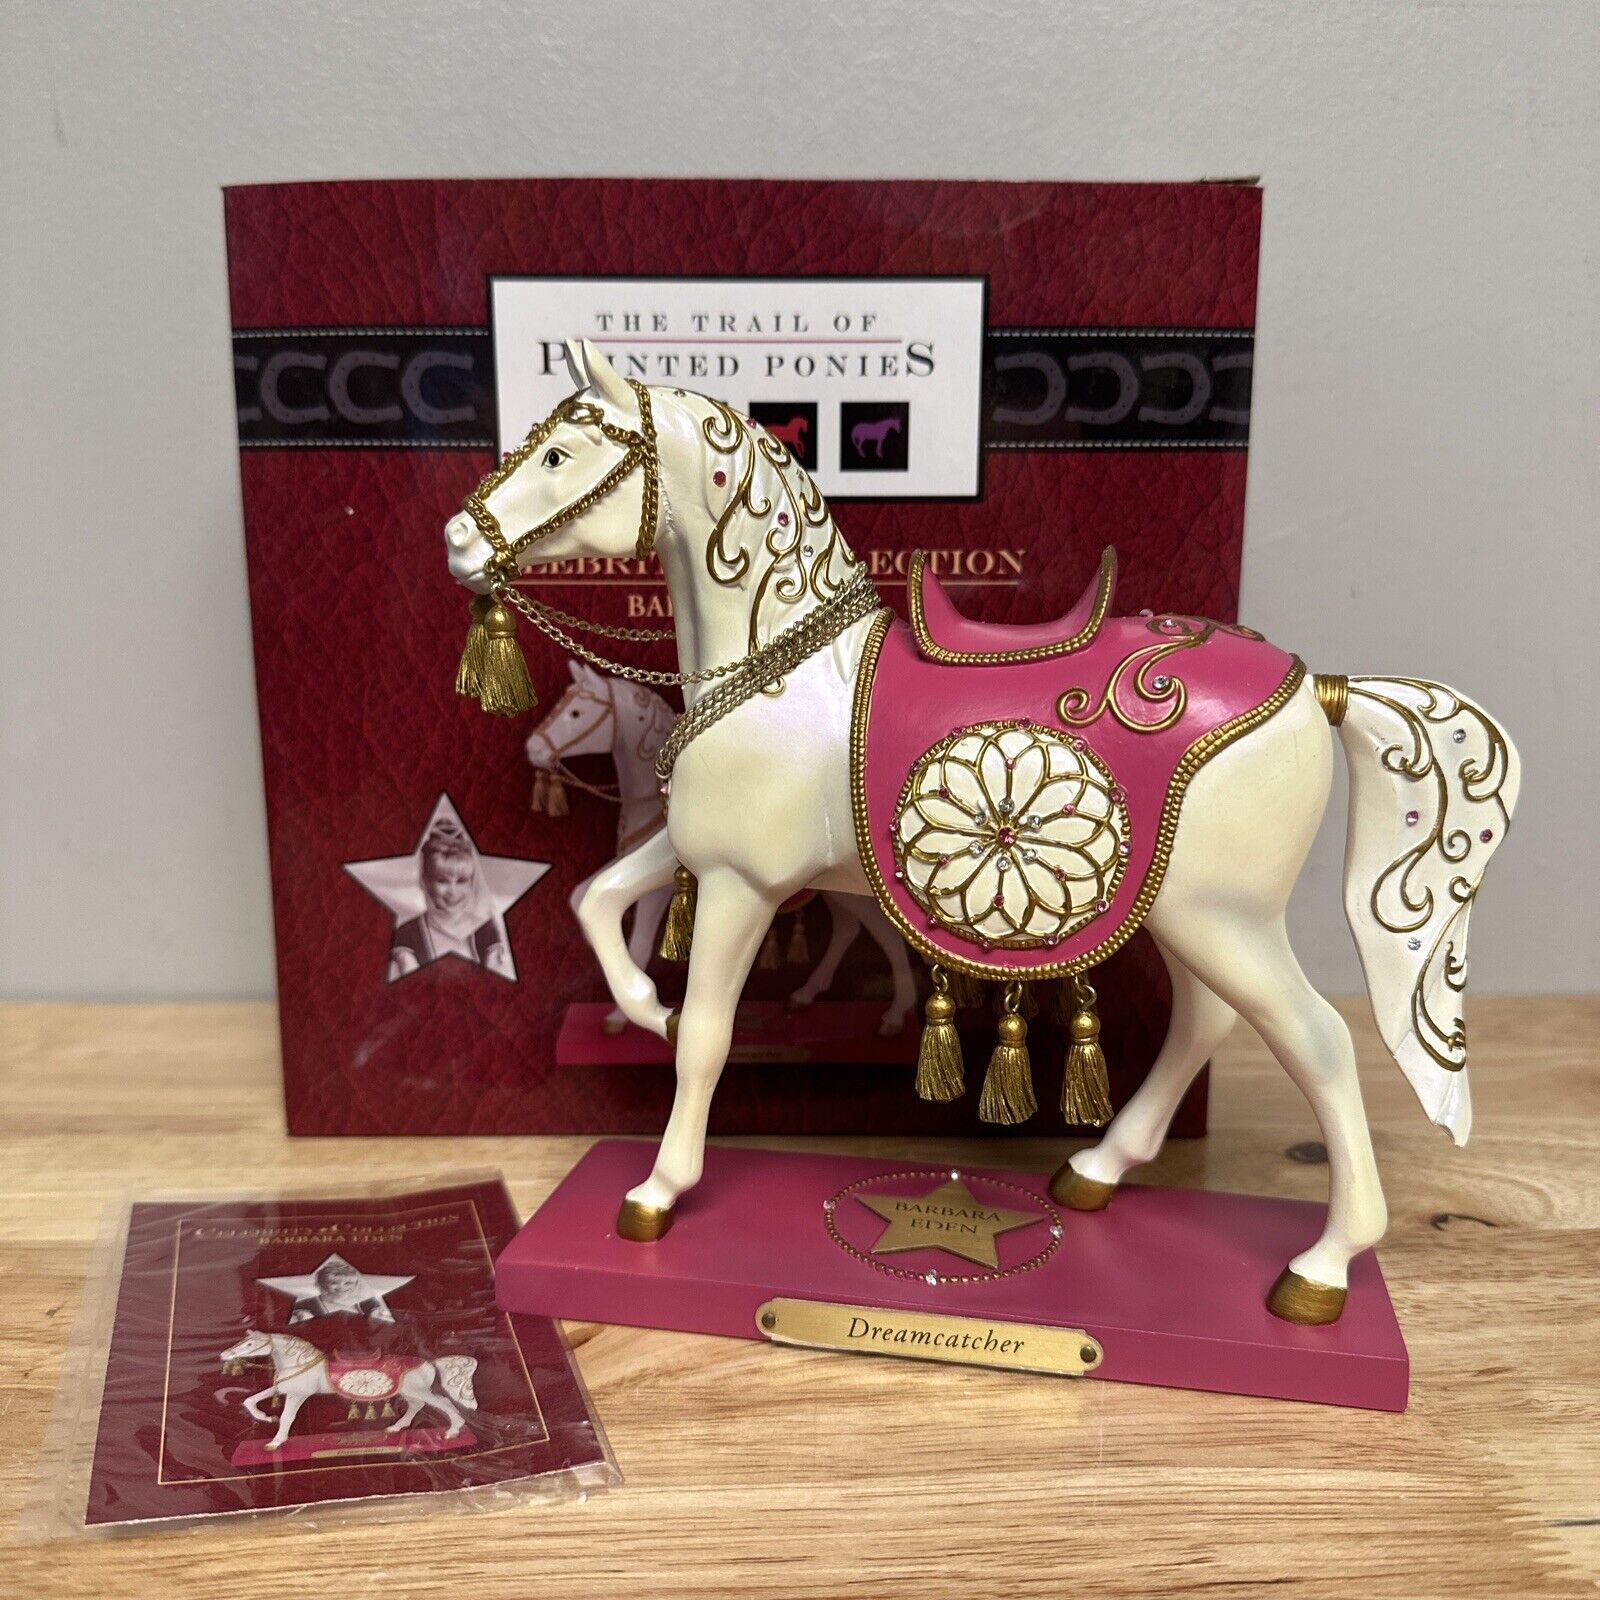 Trail of Painted Ponies Celebrity Barbara Eden DREAMCATCHER 1E/6861 In Box